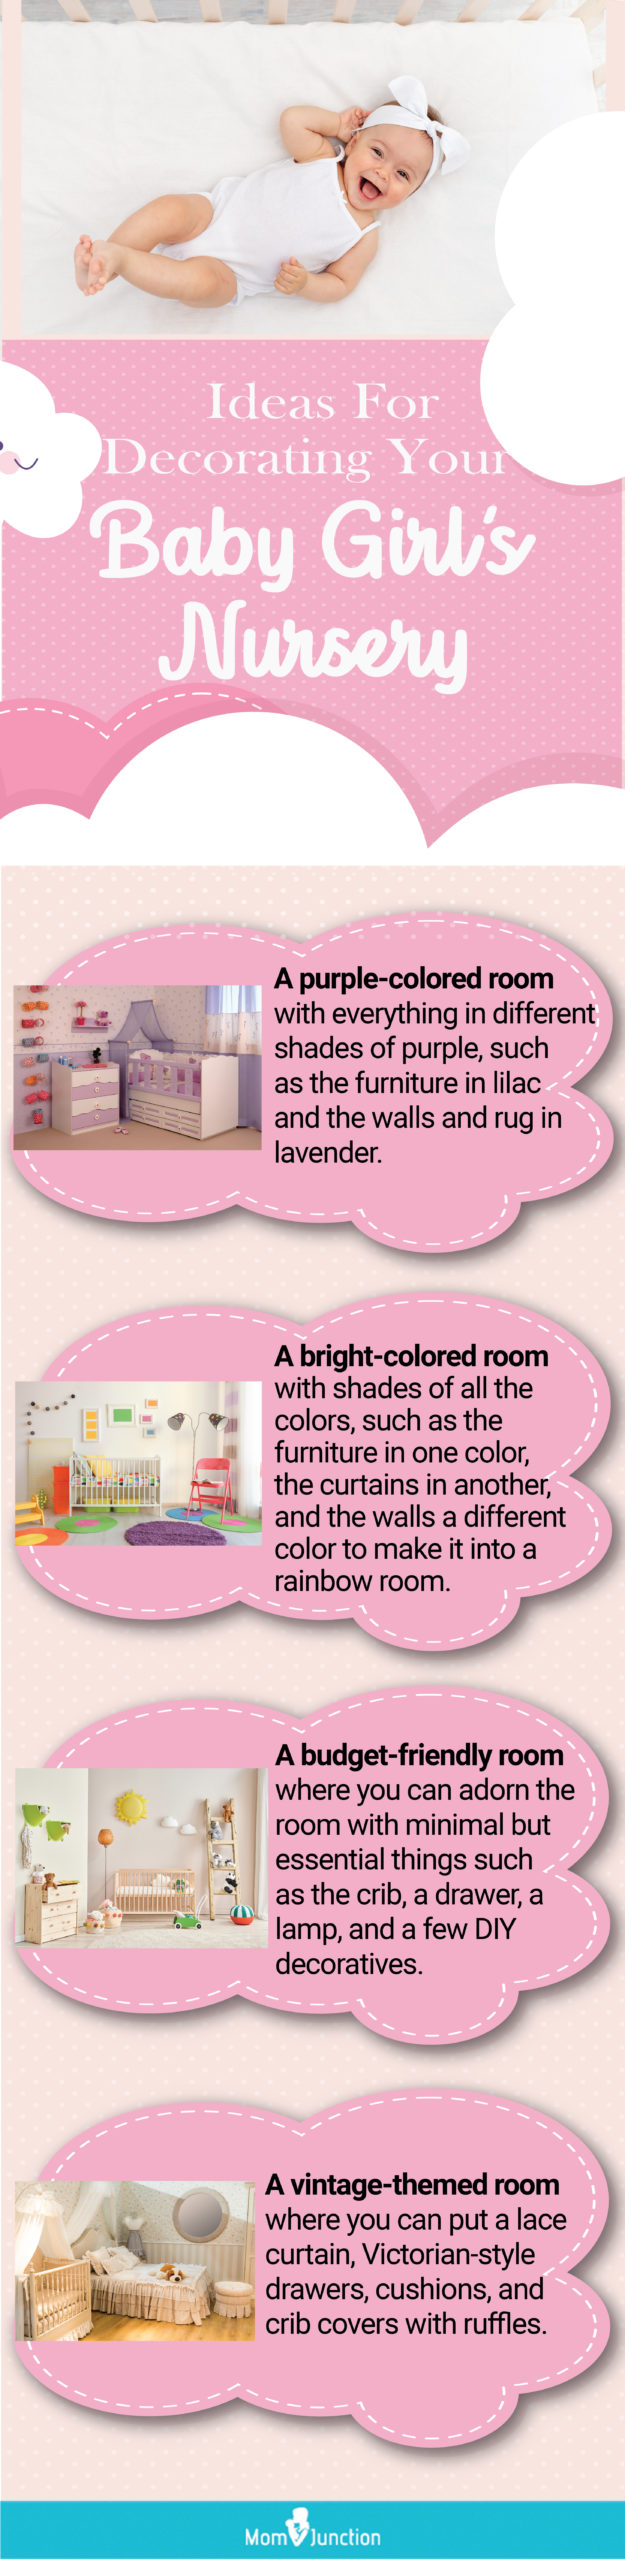 cute baby girl room ideas (infographic)